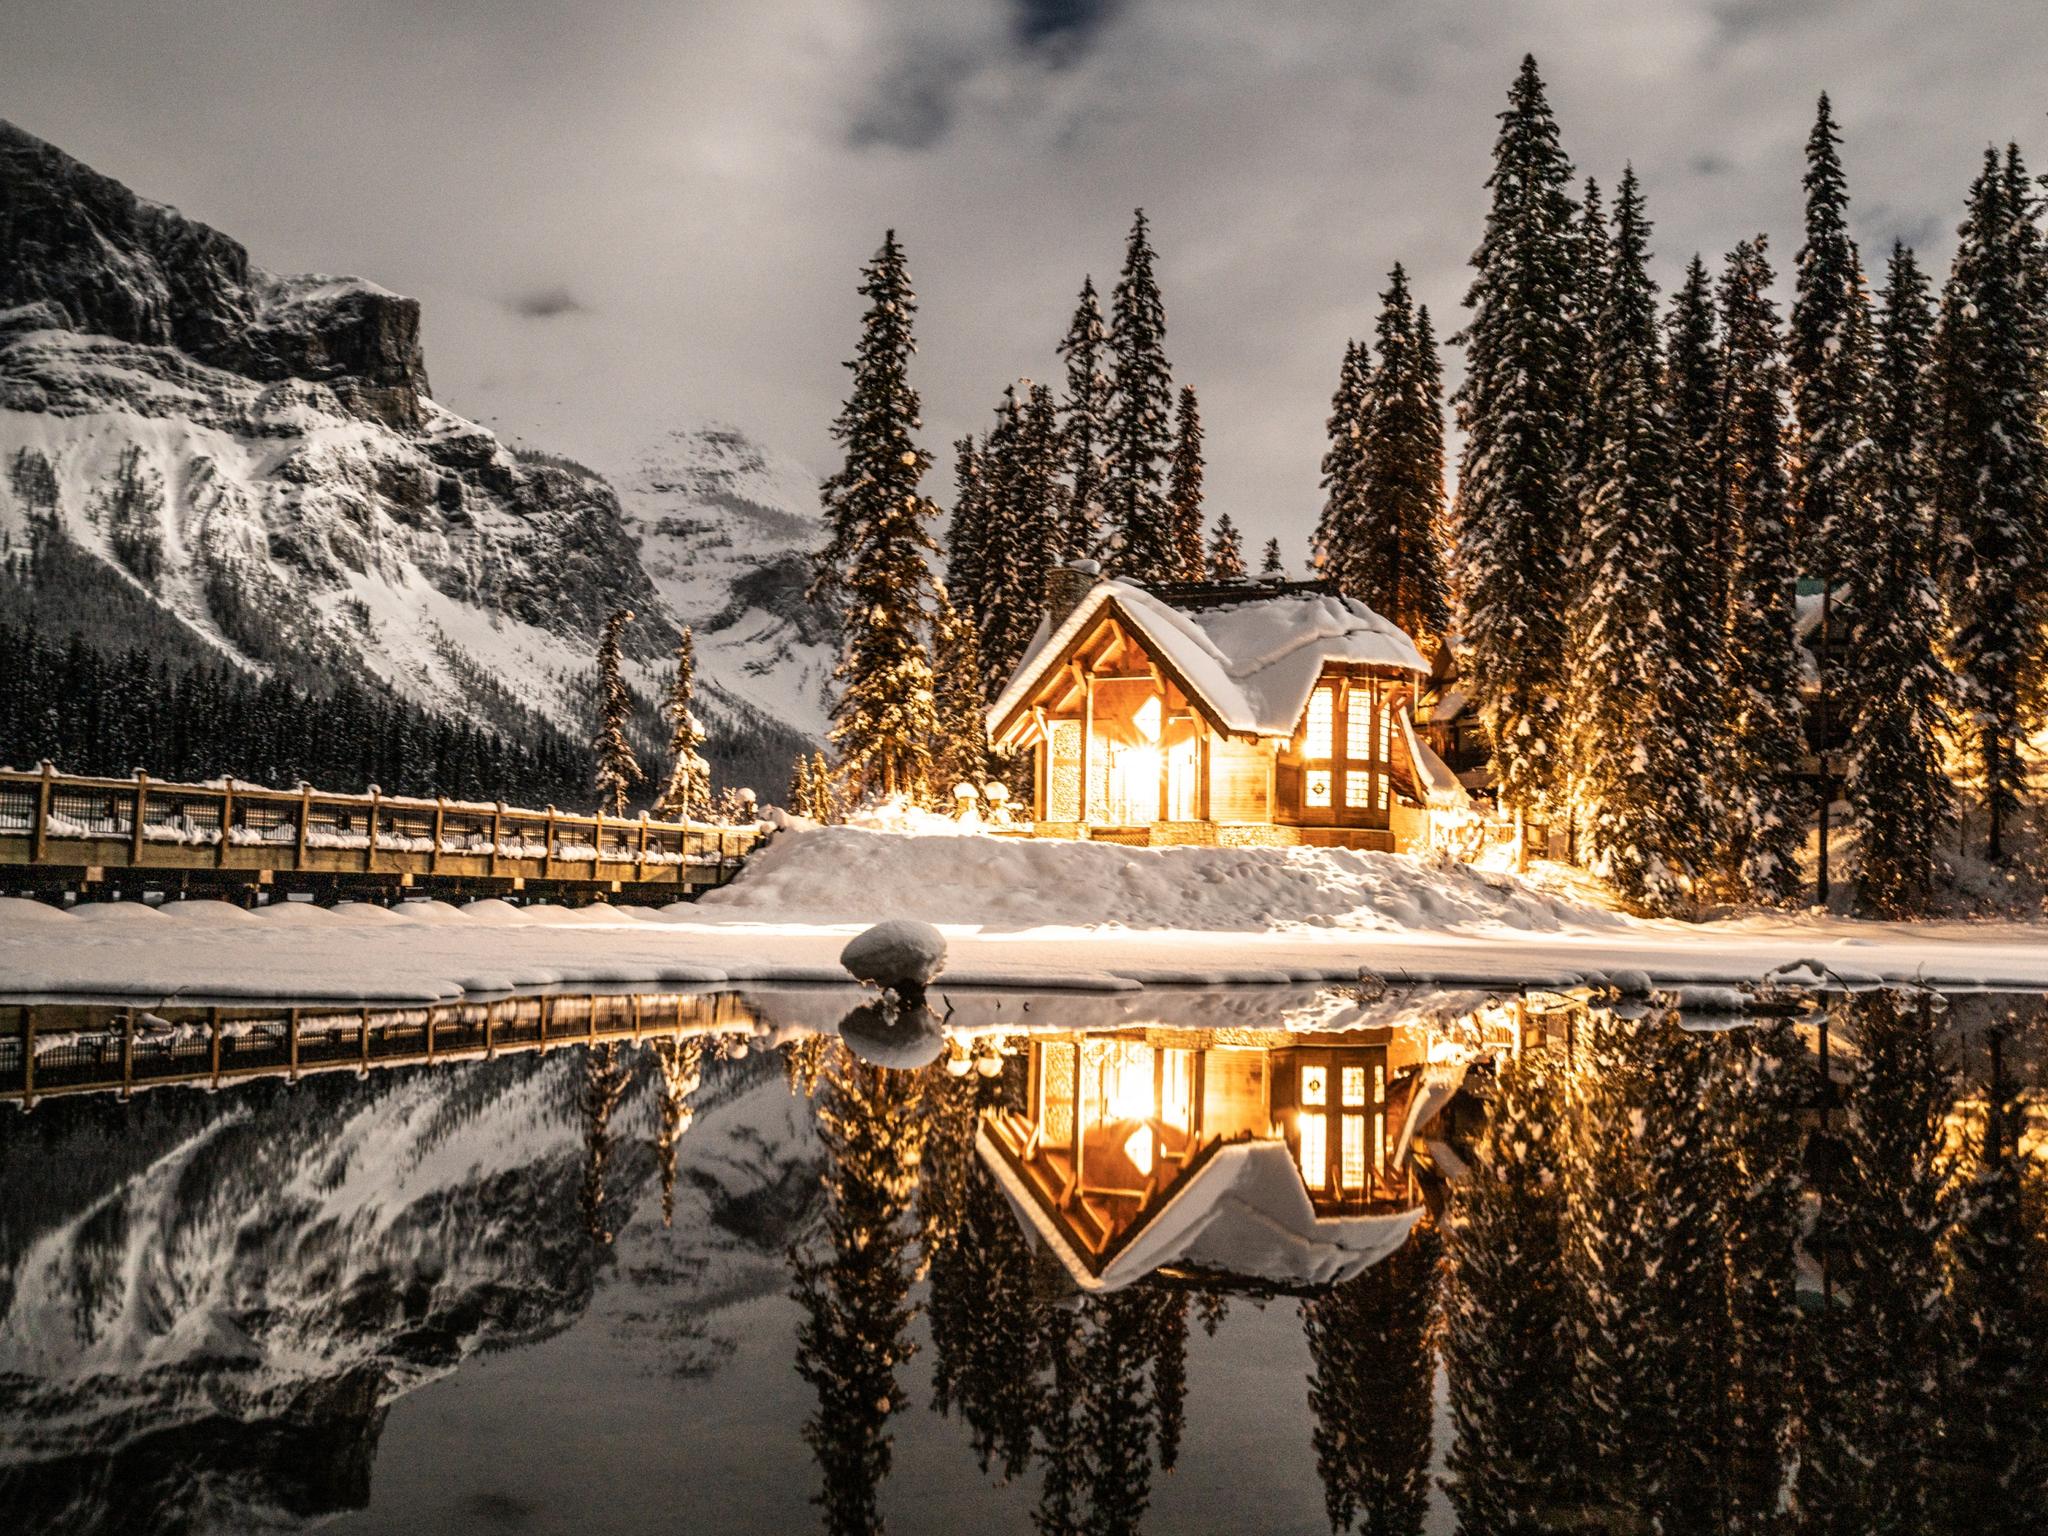 Travel Canada in winter for skiing, cabins and canyons | The